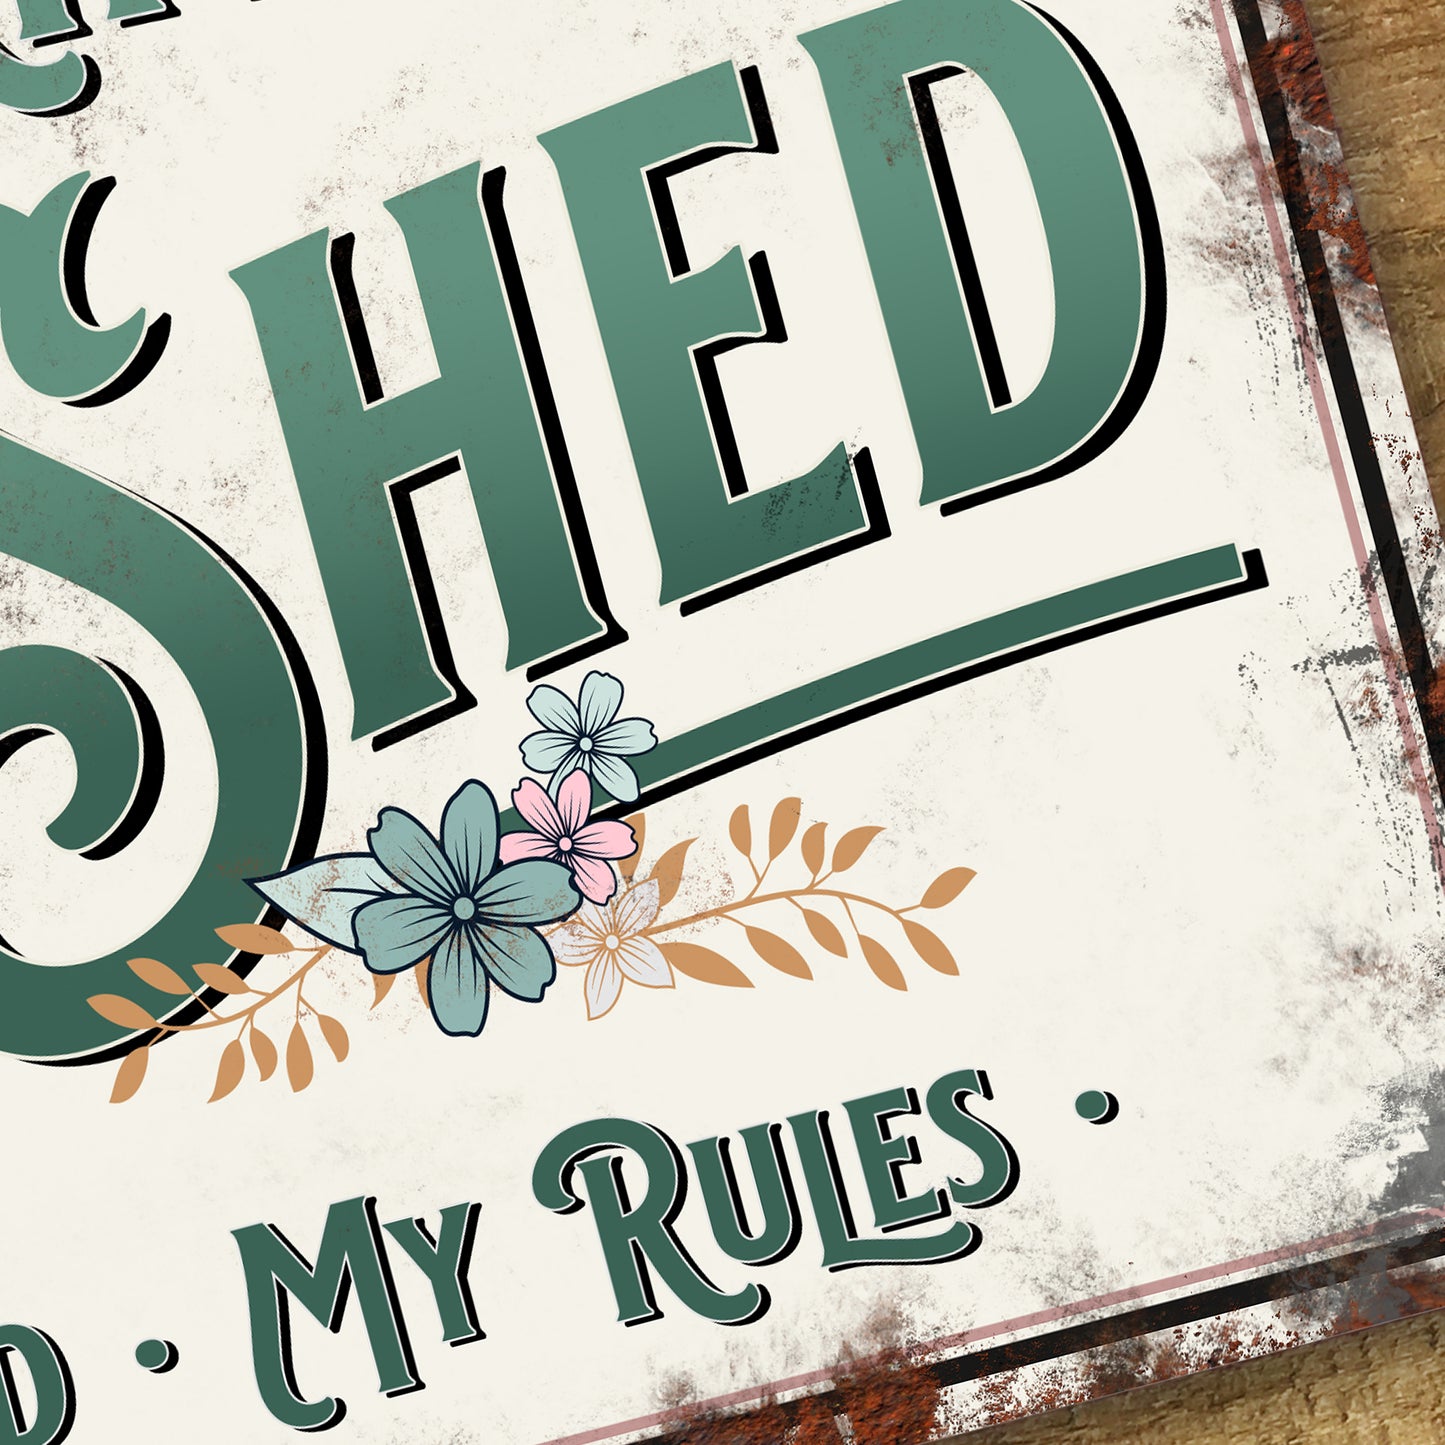 Personalised She Shed Sign Metal Garden Shed Sign 200x305mm